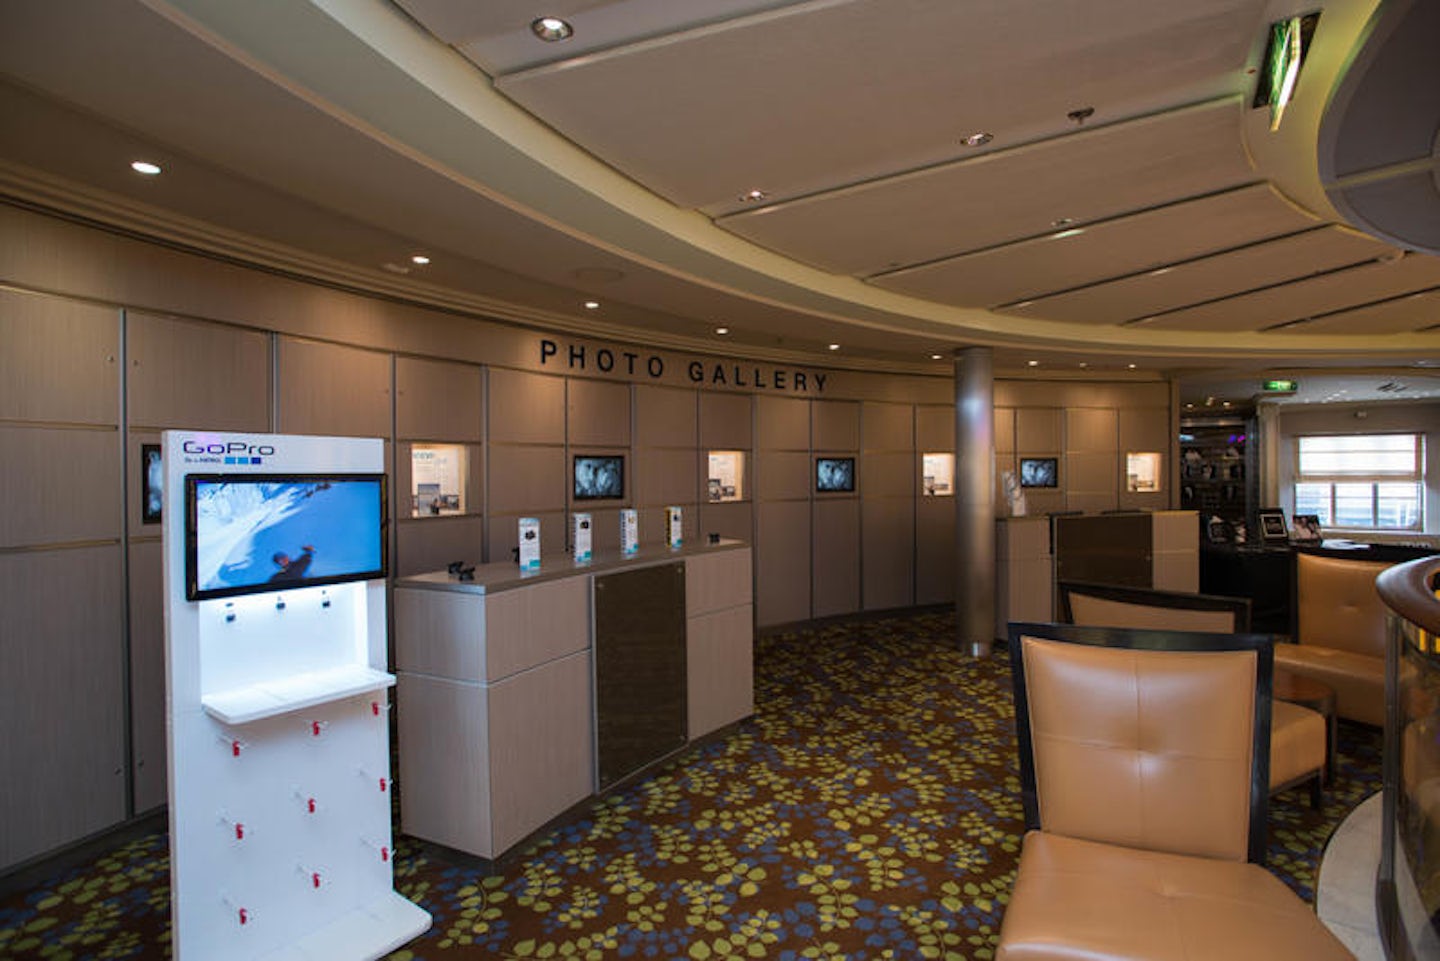 Photo and Video Gallery on Celebrity Eclipse